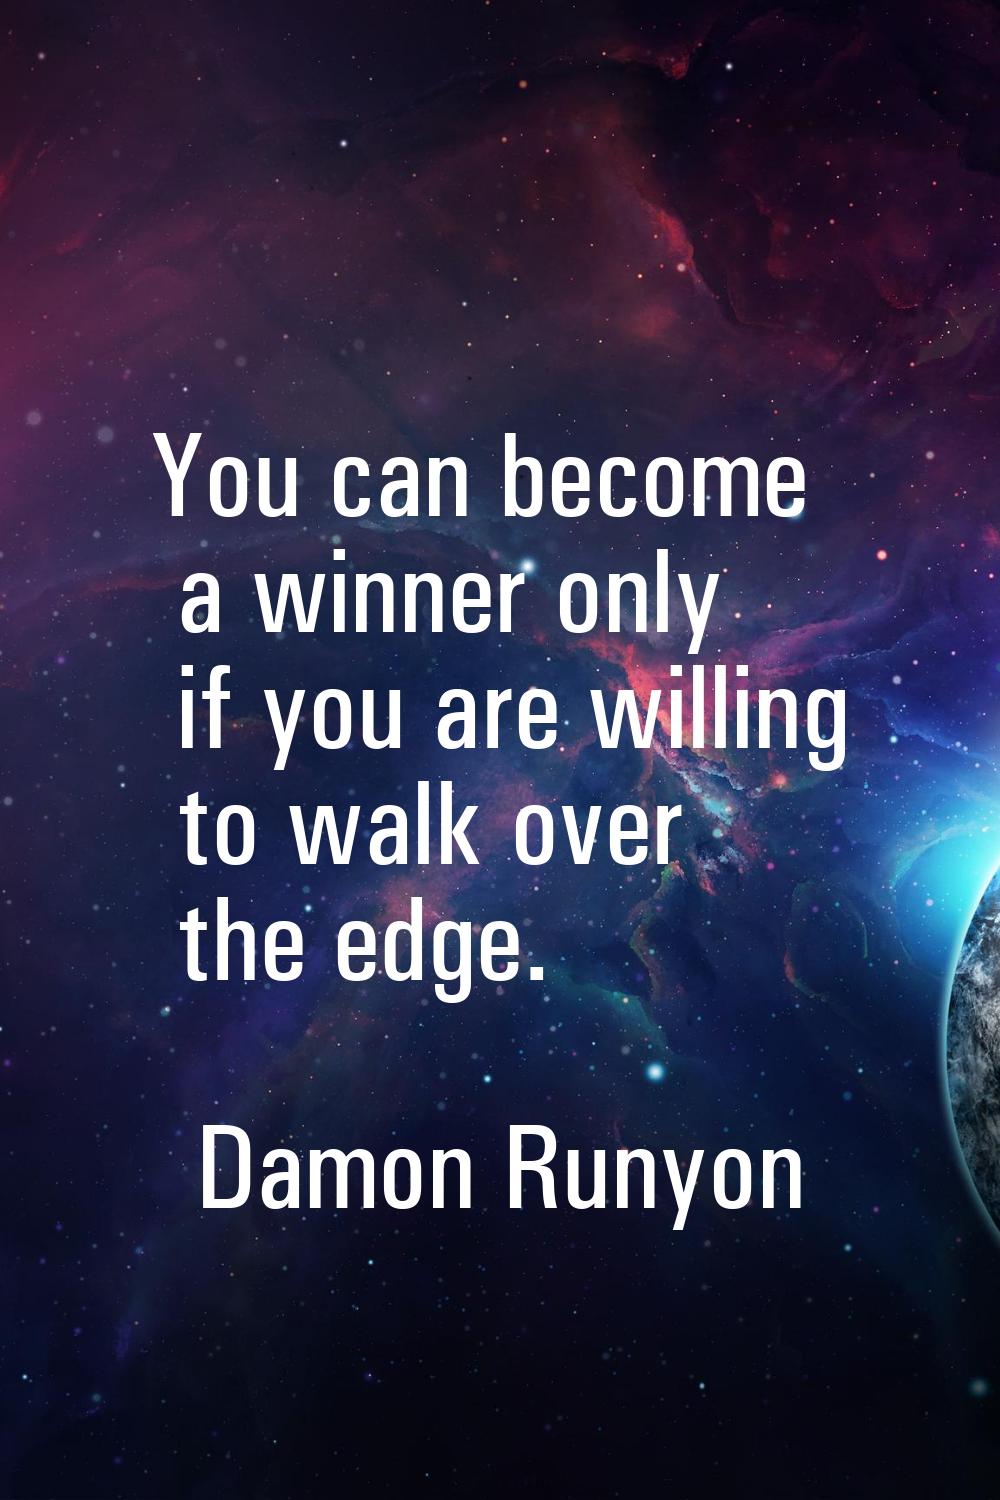 You can become a winner only if you are willing to walk over the edge.